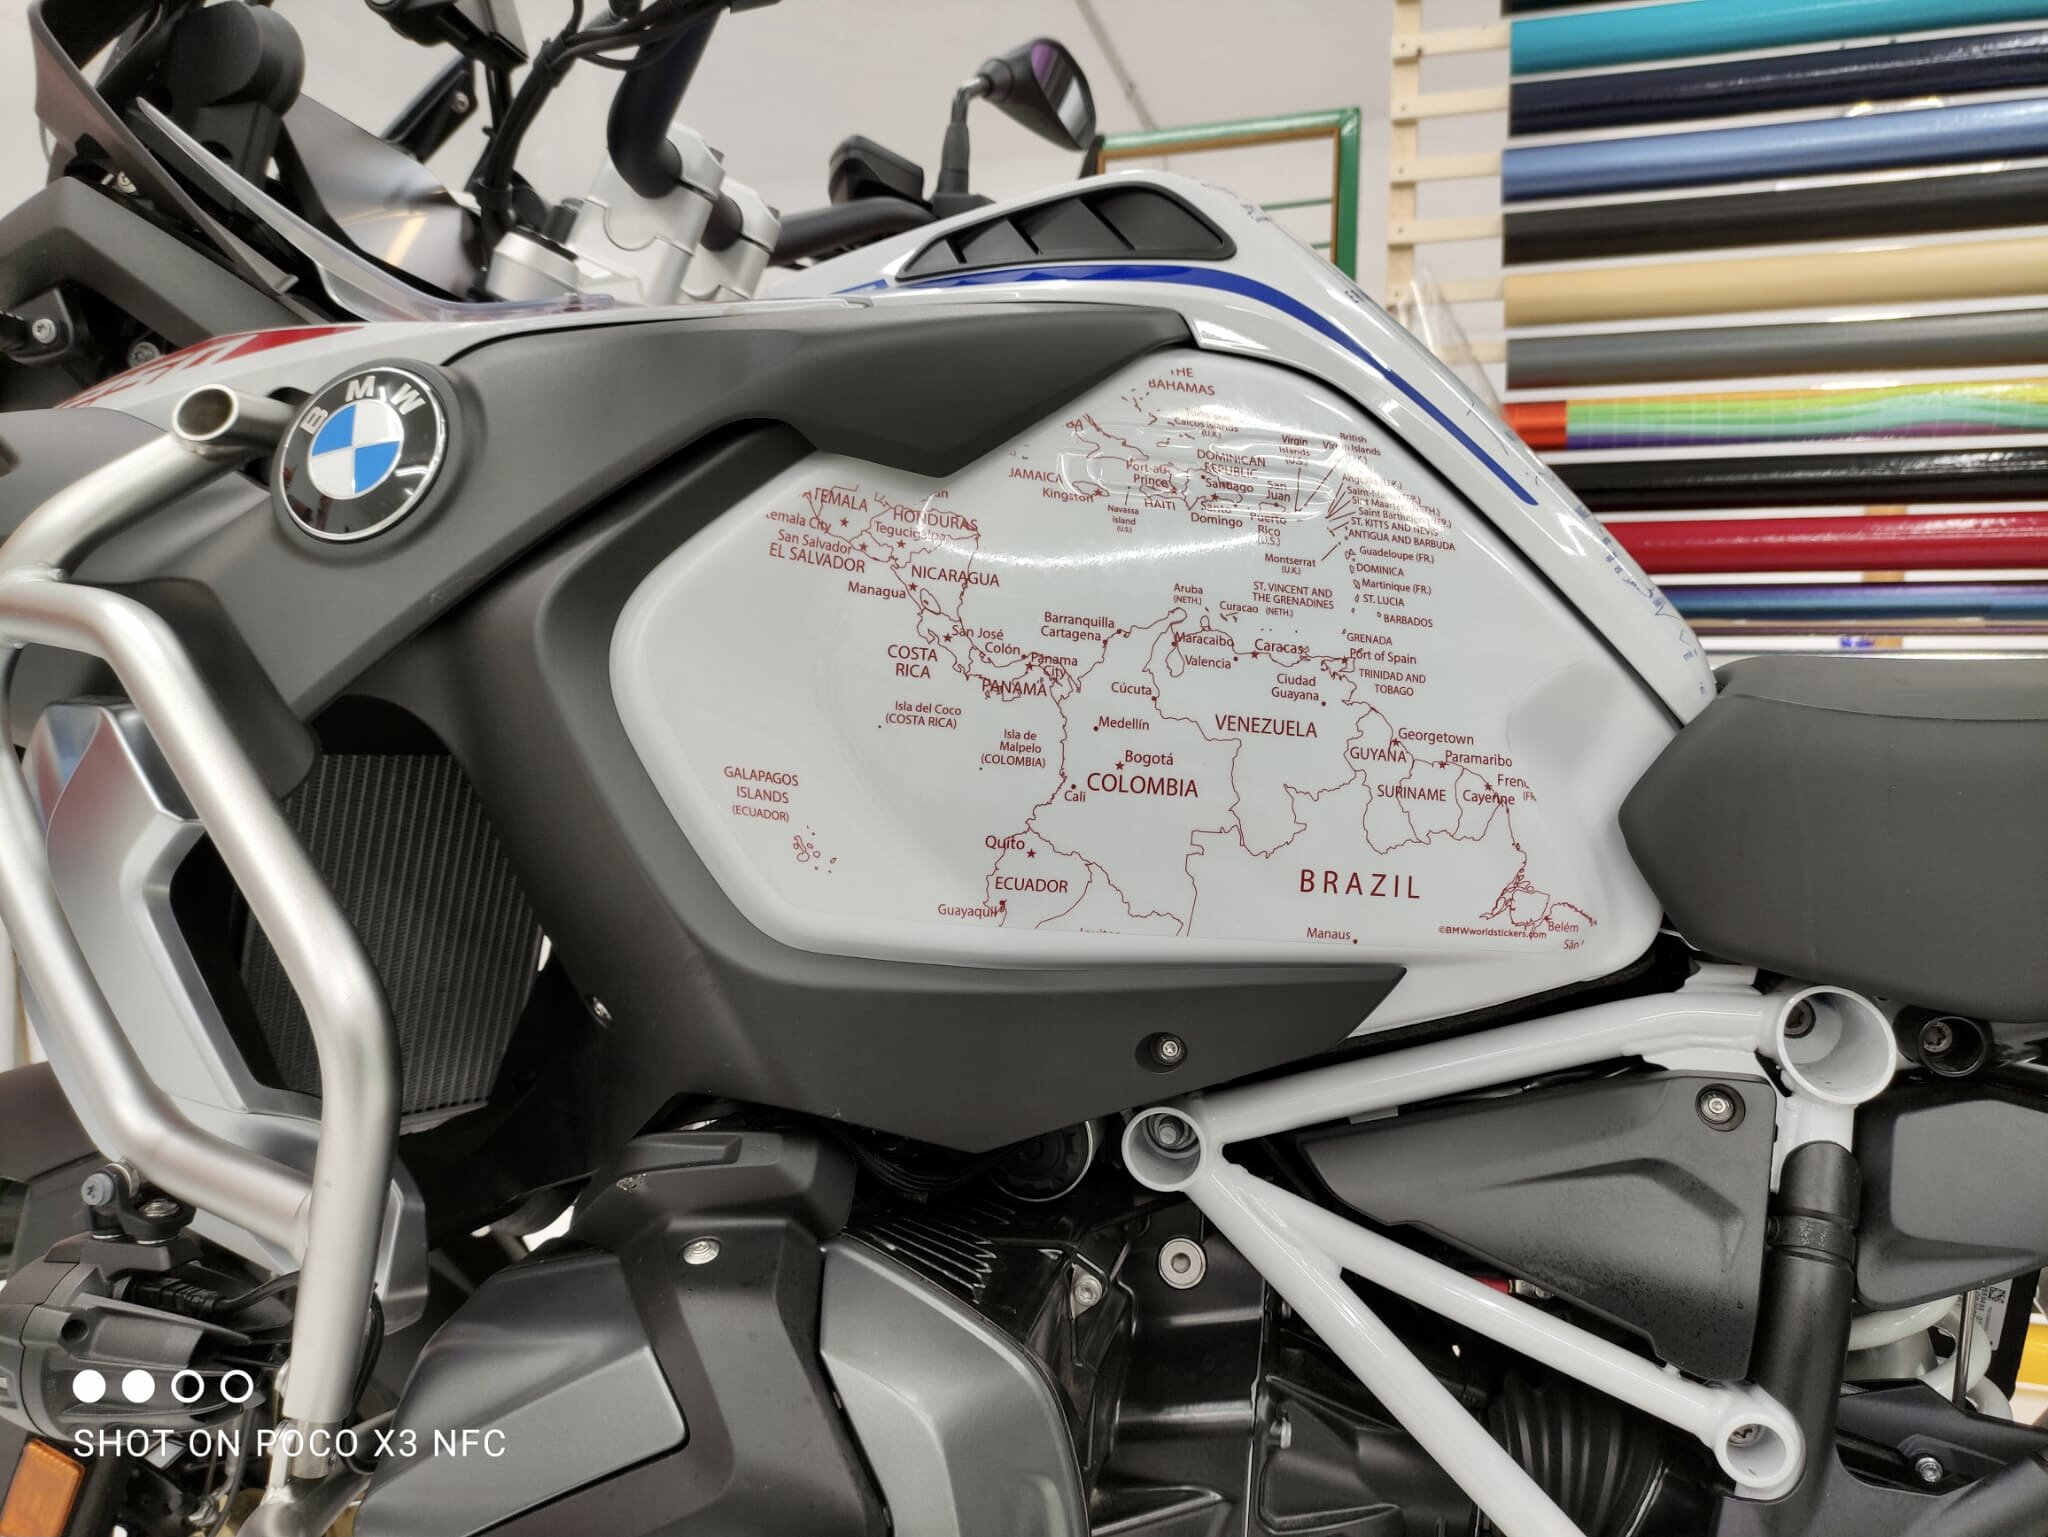 BMW R1250GS Adv Rallye Tank Map World Stickers Decals Graphics design by BMW World Stickers also offers Paint Protection Film, PPF